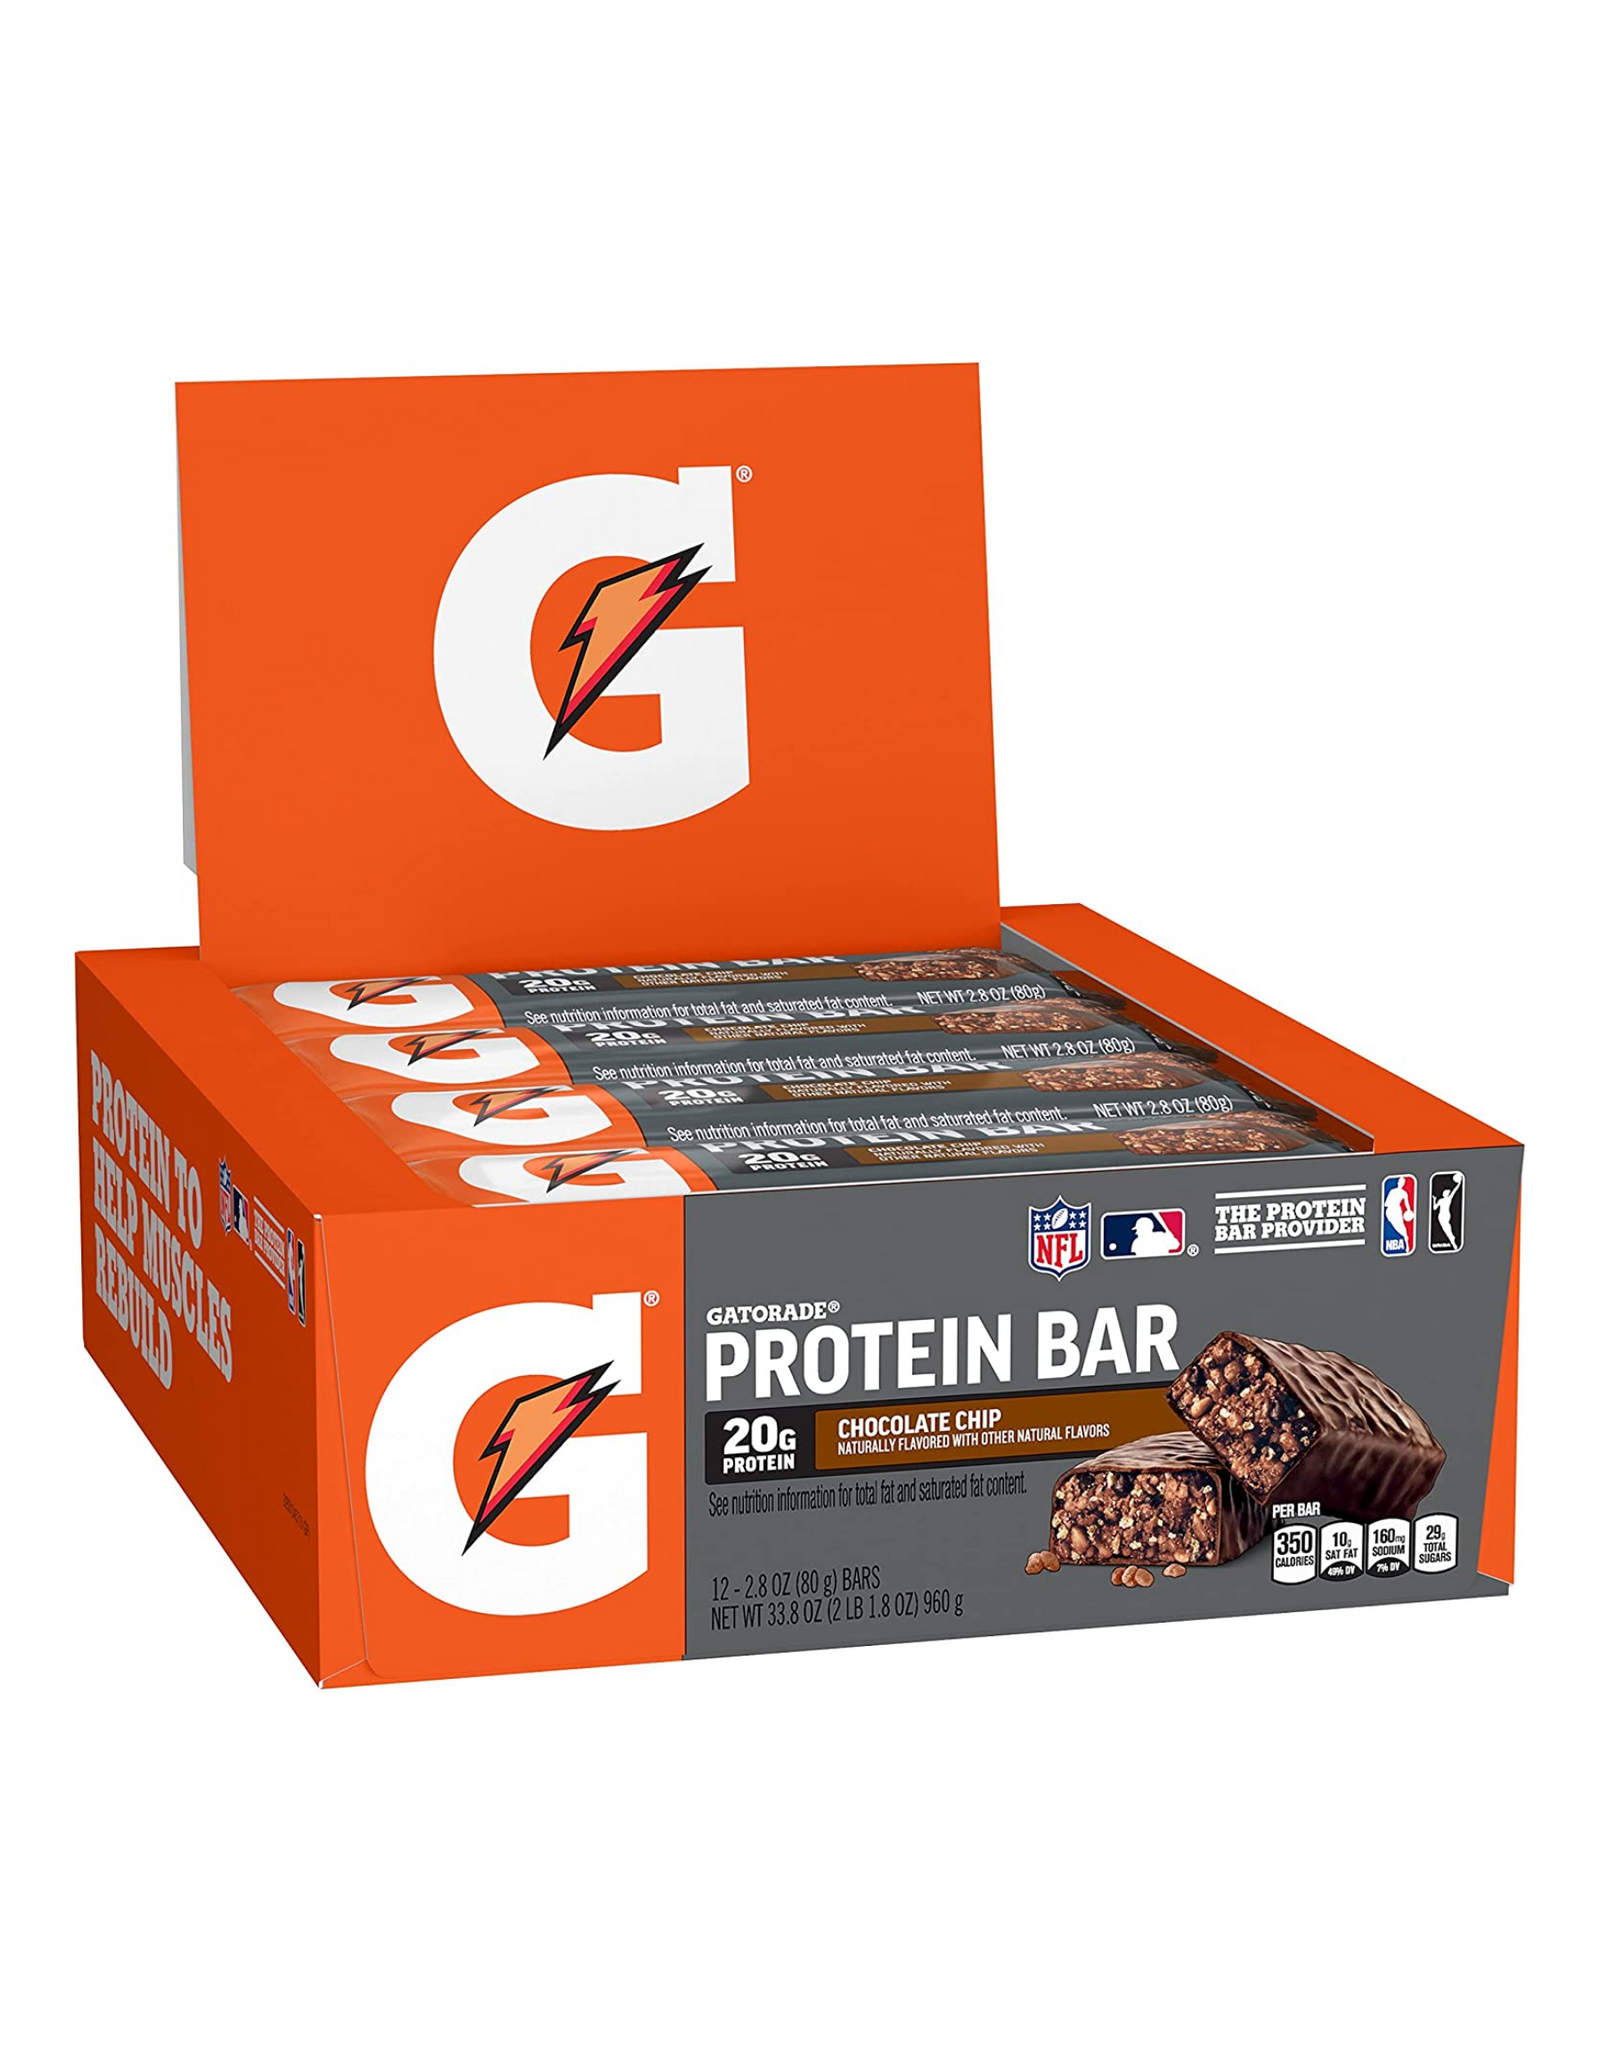 Gatorade Whey Protein Recover Bars with 20g Protein, Chocolate Chip, 2.8 oz, 12 Ct